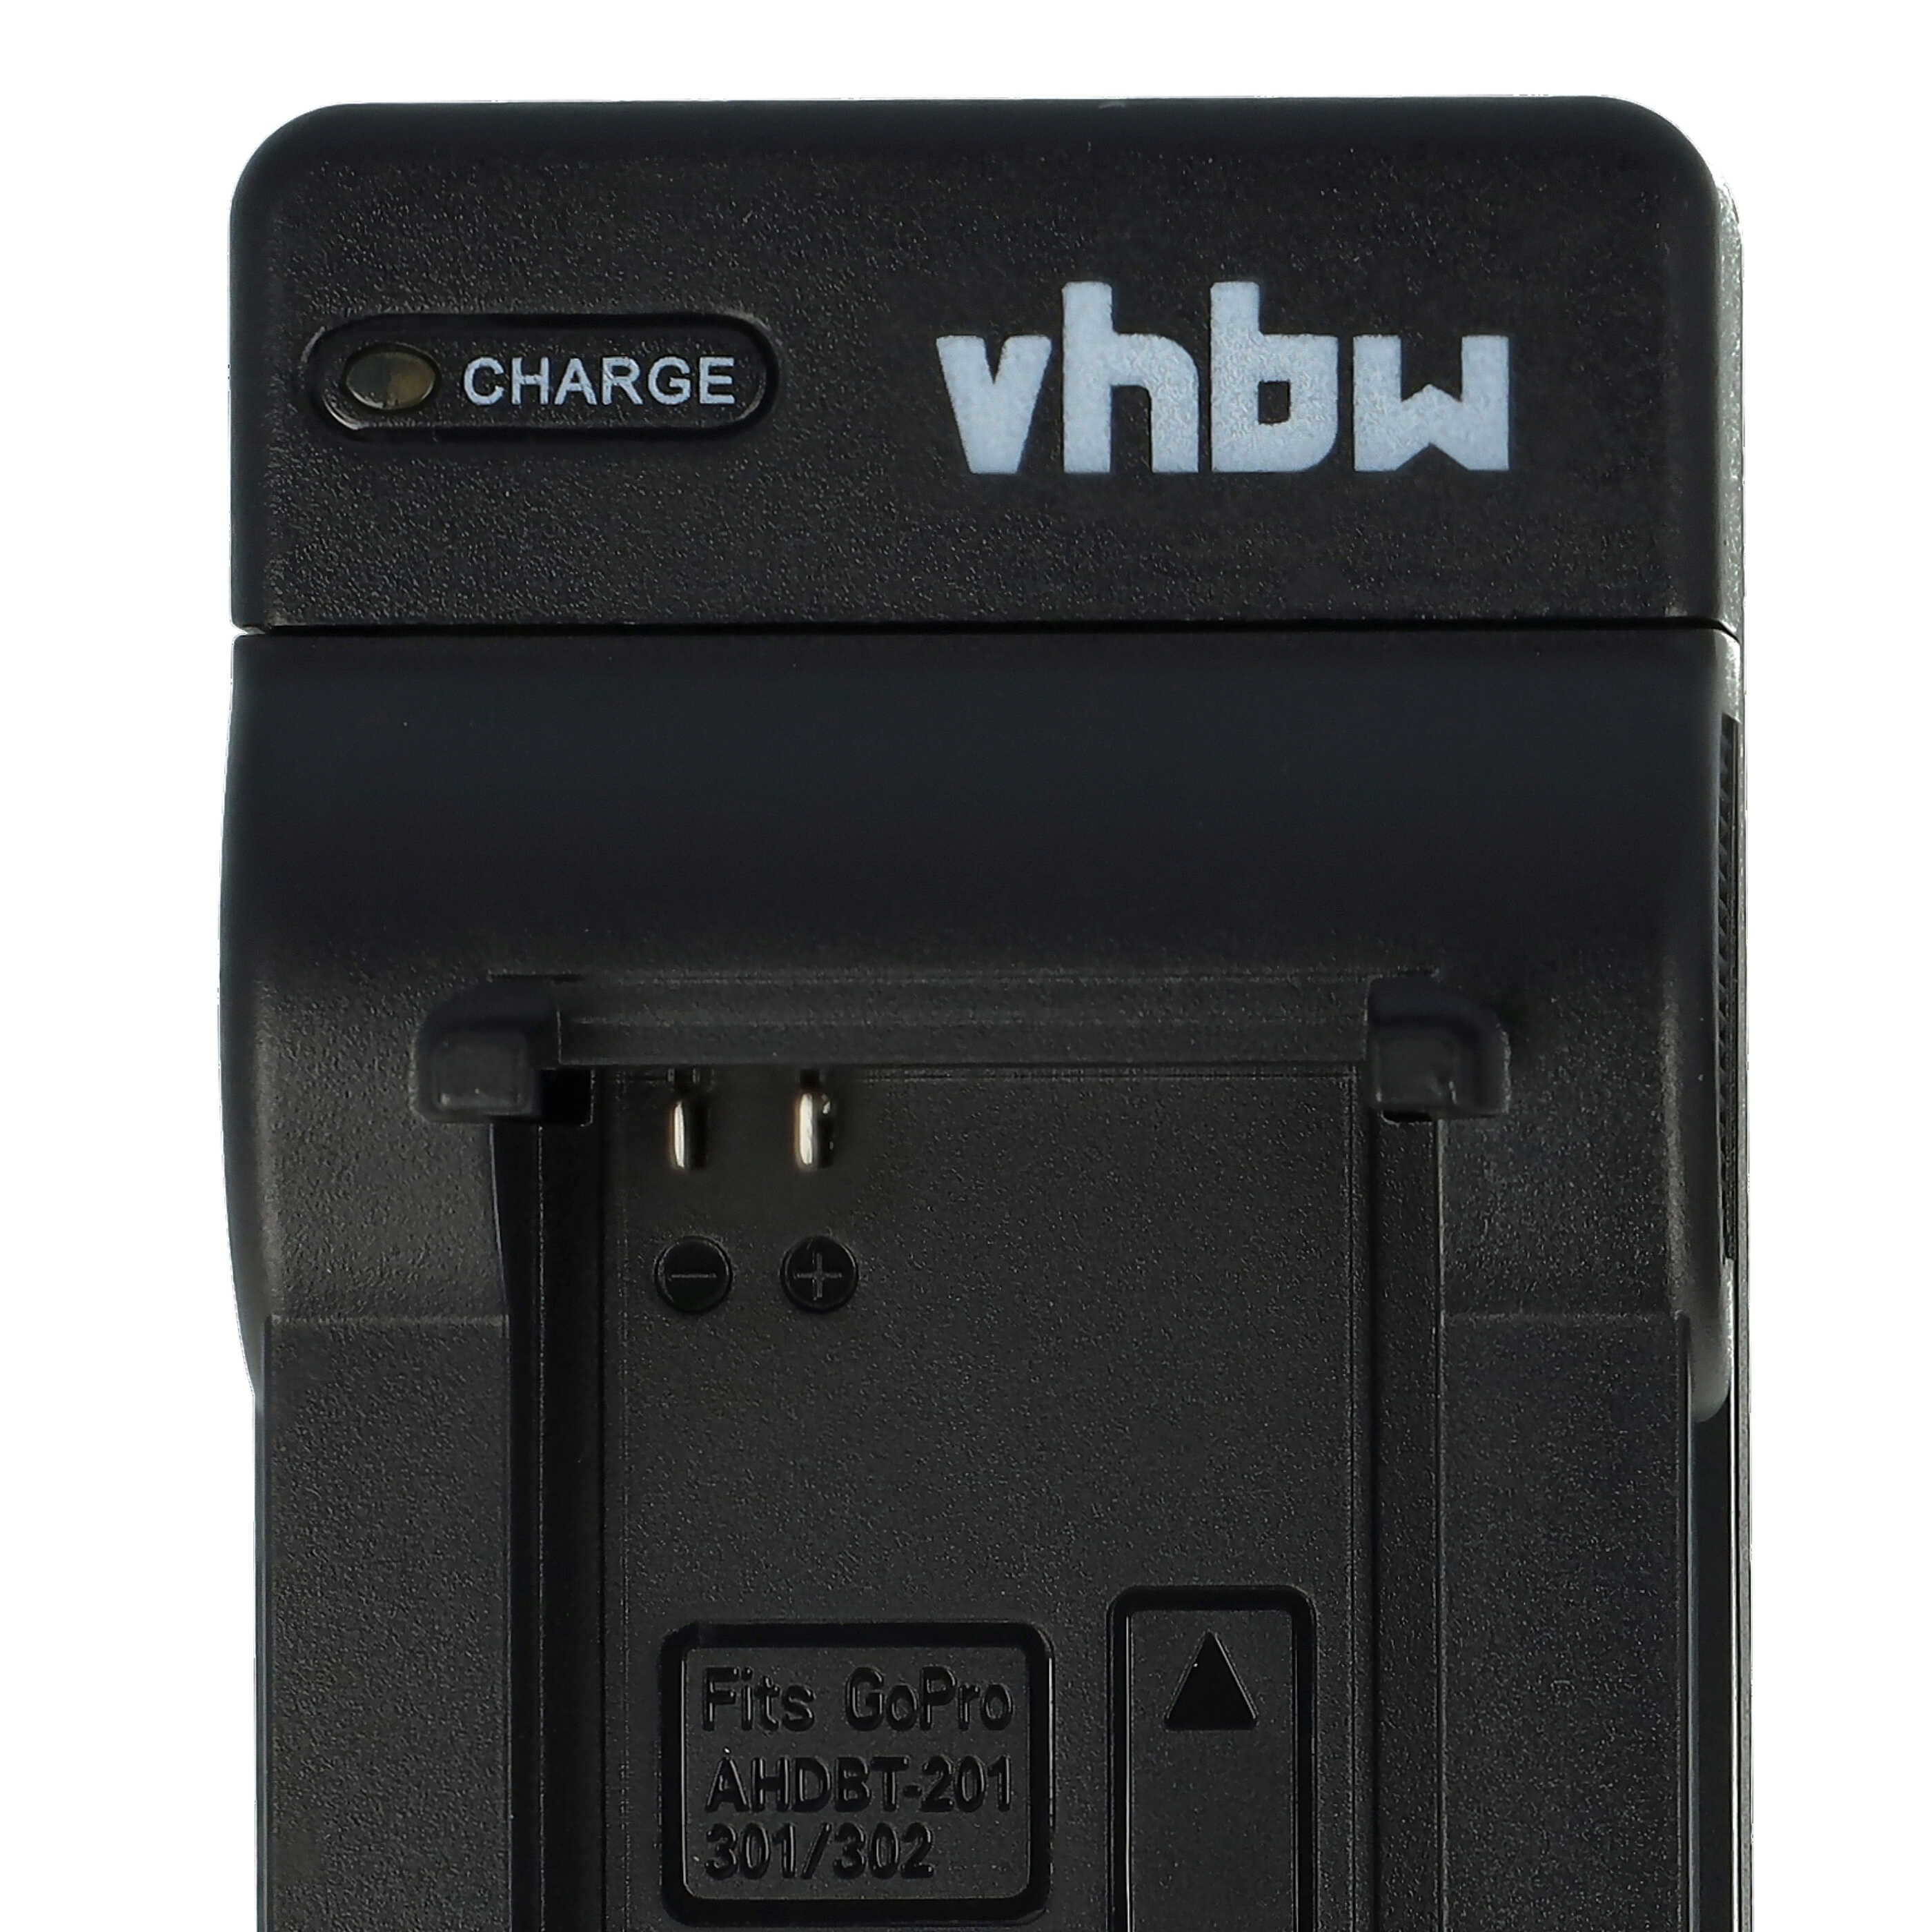 Battery Charger suitable for Hero 3 III Camera etc. - 0.5 A, 4.2 V